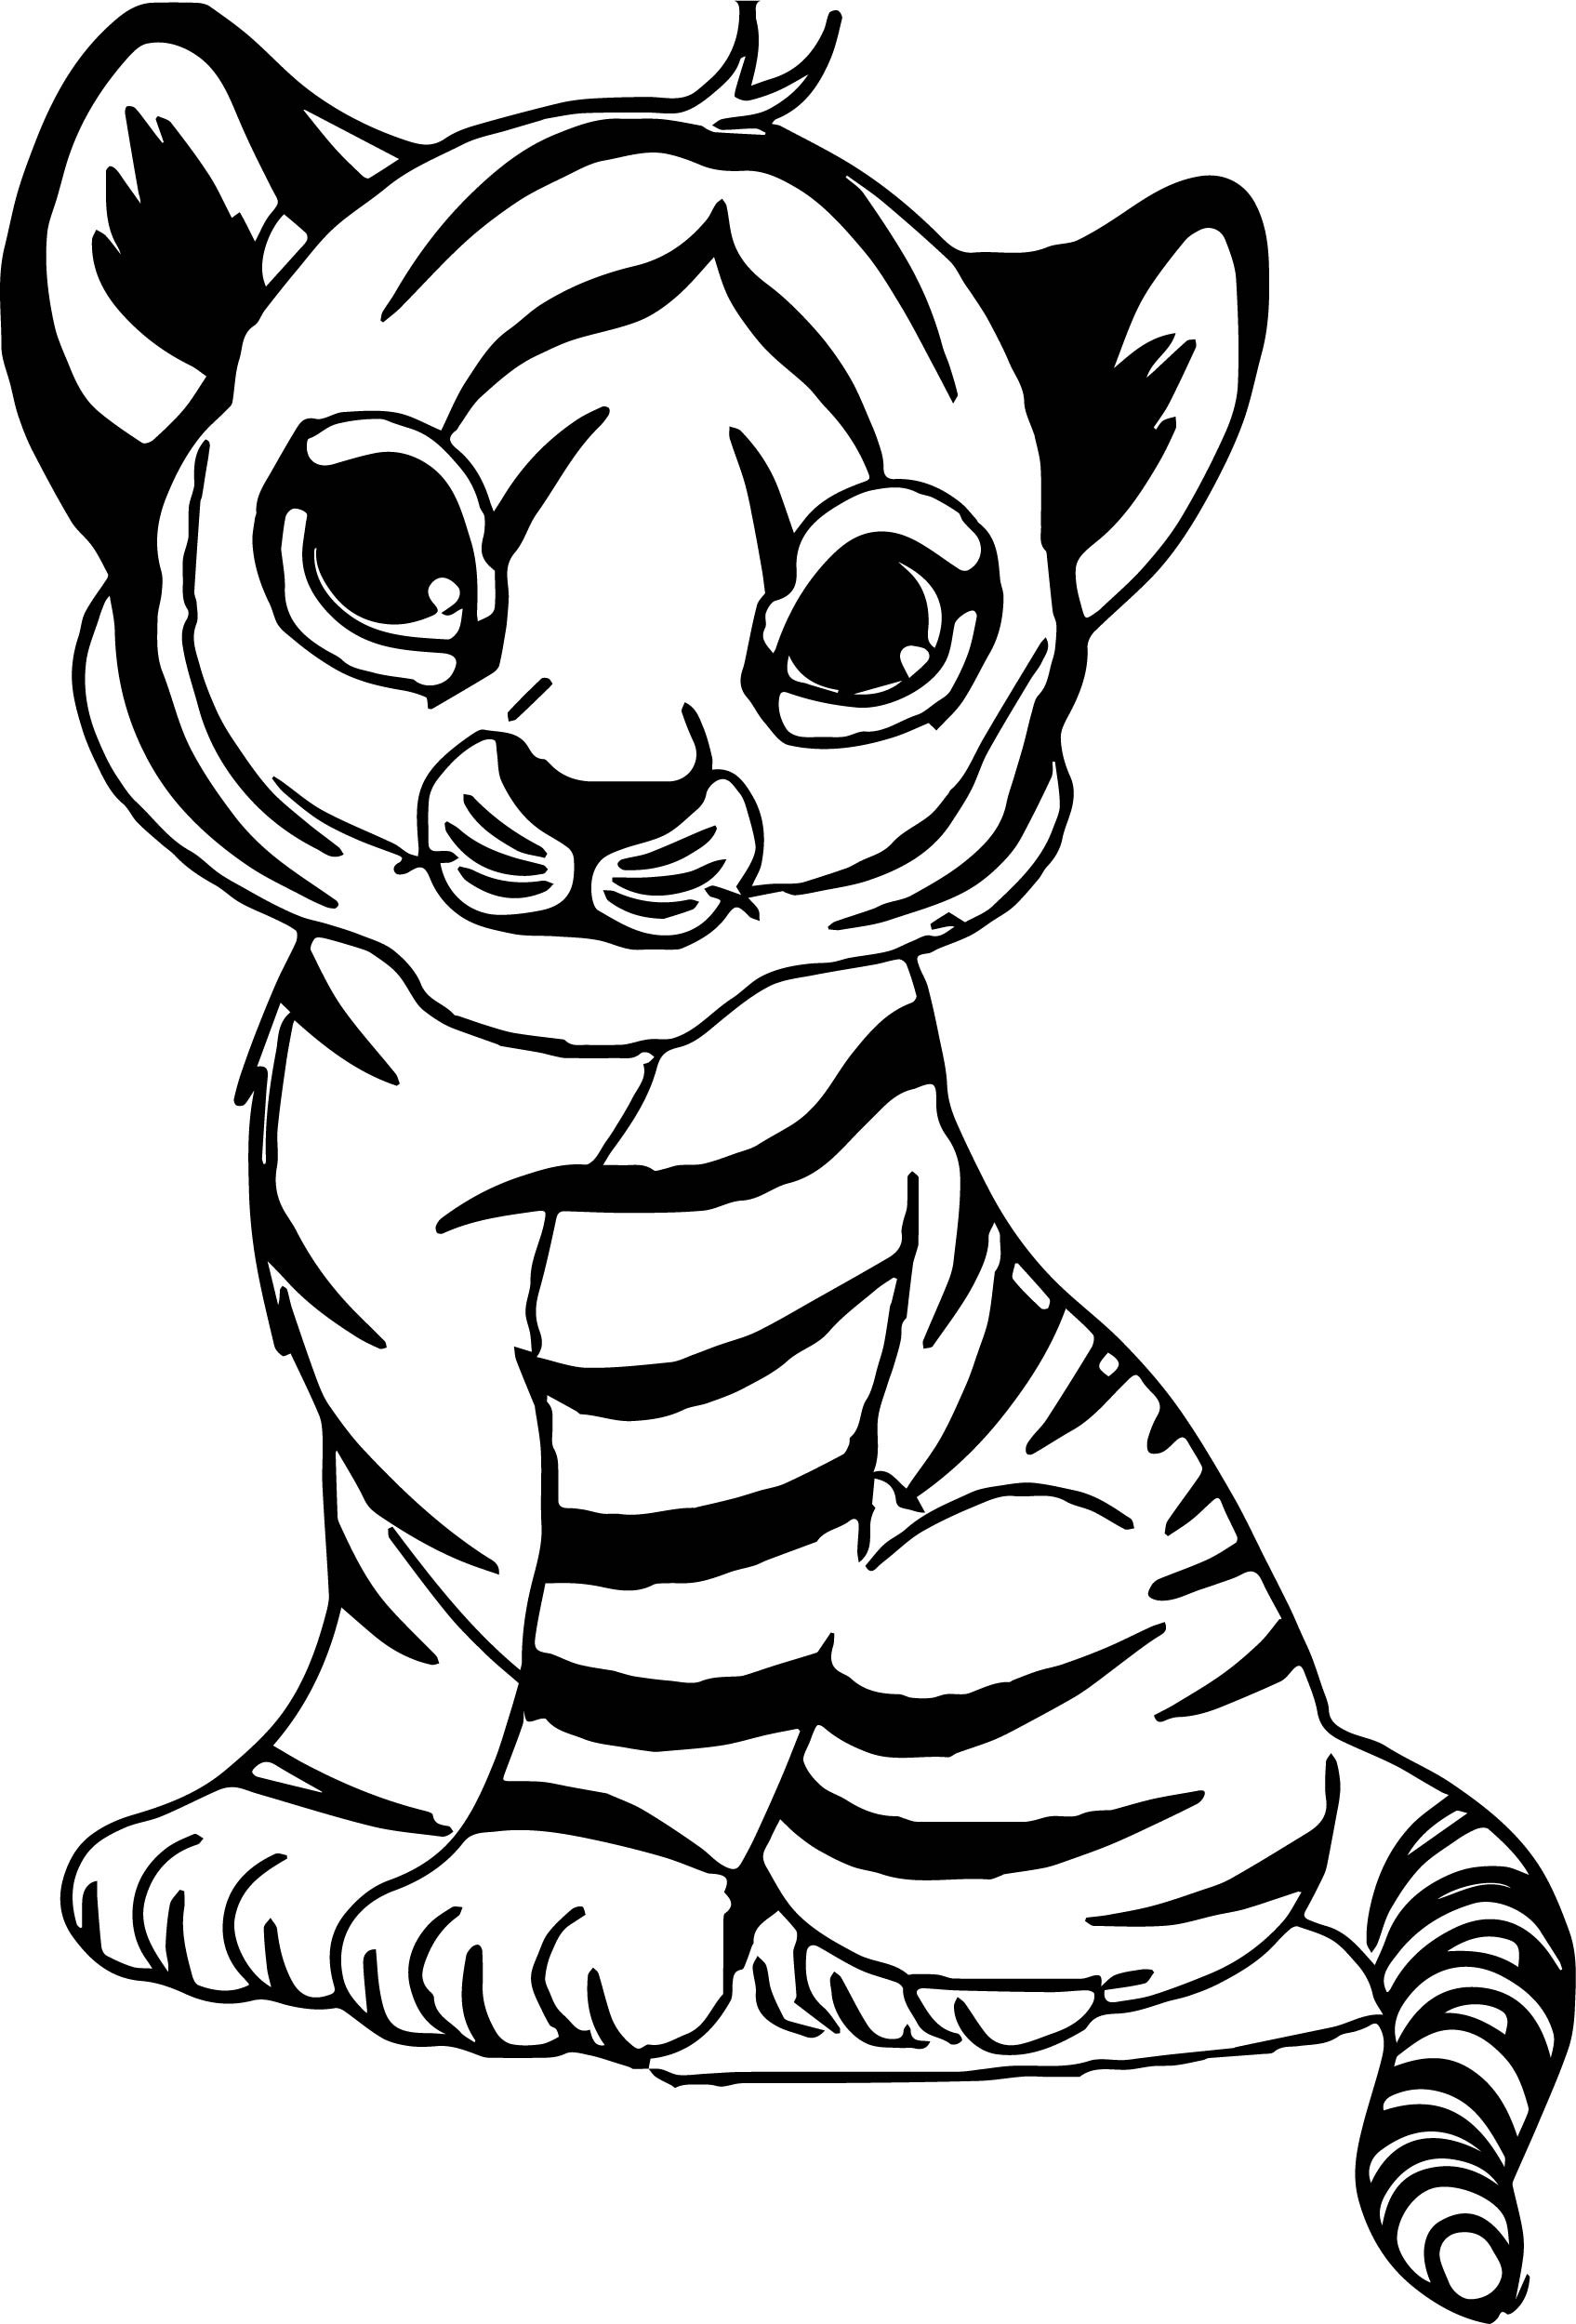 Baby Tiger Coloring Pages
 Cute Baby Tiger Coloring Page